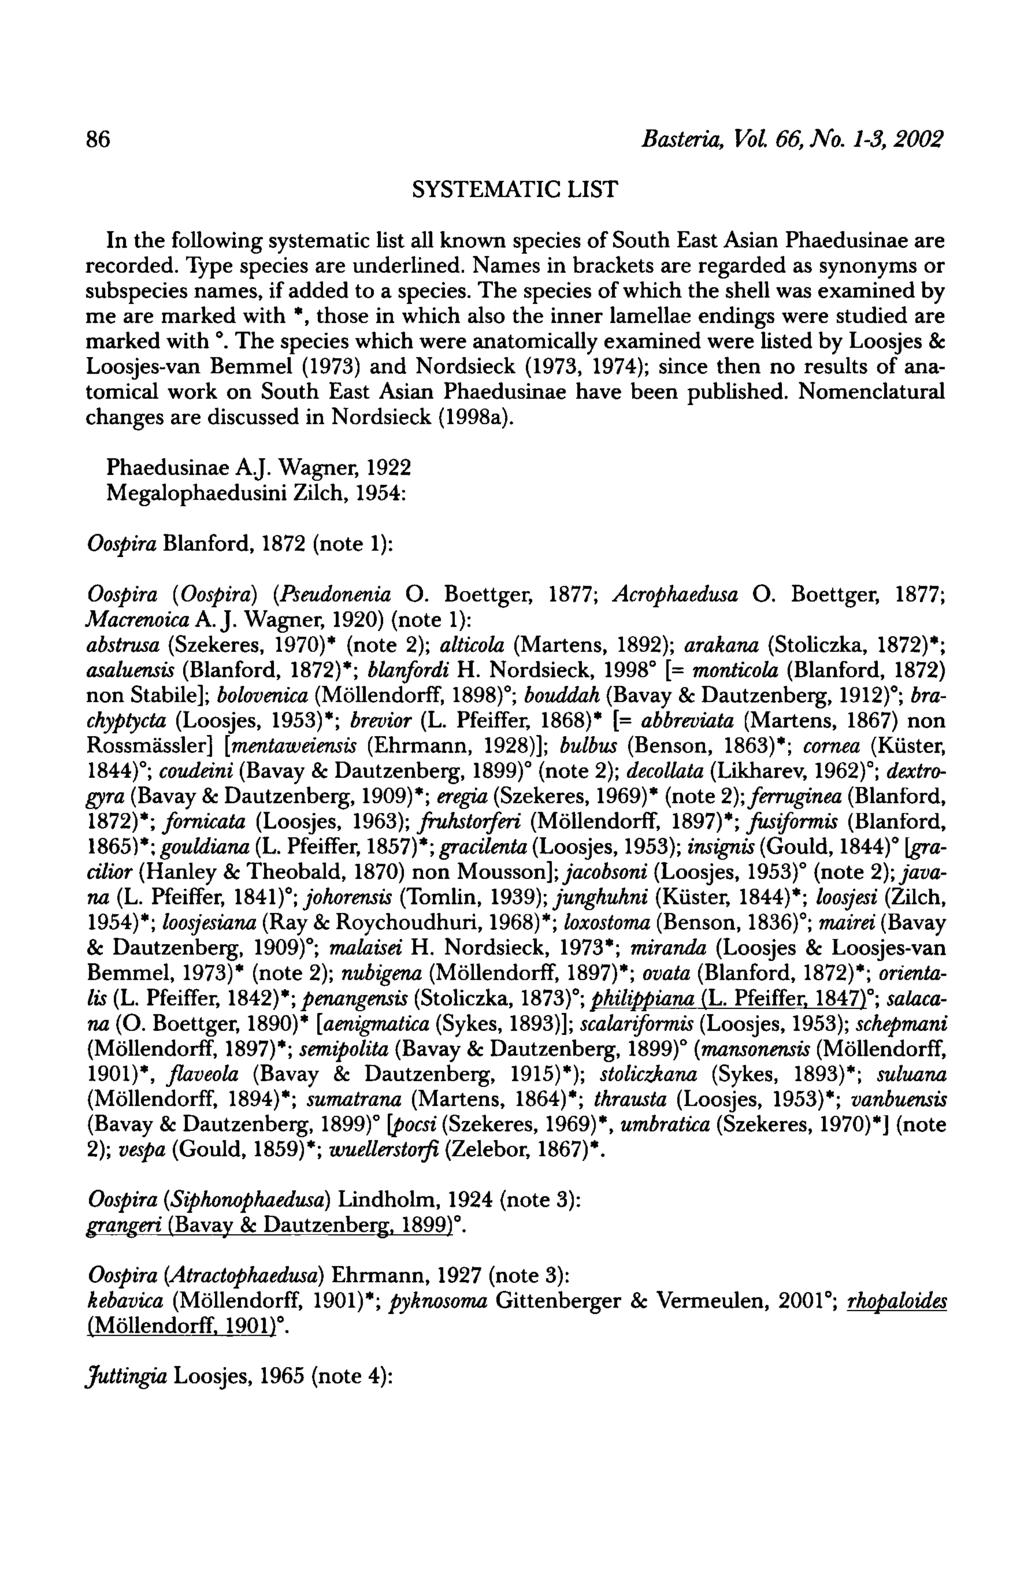 86 Basteria, Vol. 66, No. 13, 2002 SYSTEMATIC LIST In the following systematic list all known species of South East Asian Phaedusinae are recorded. Type species are underlined.